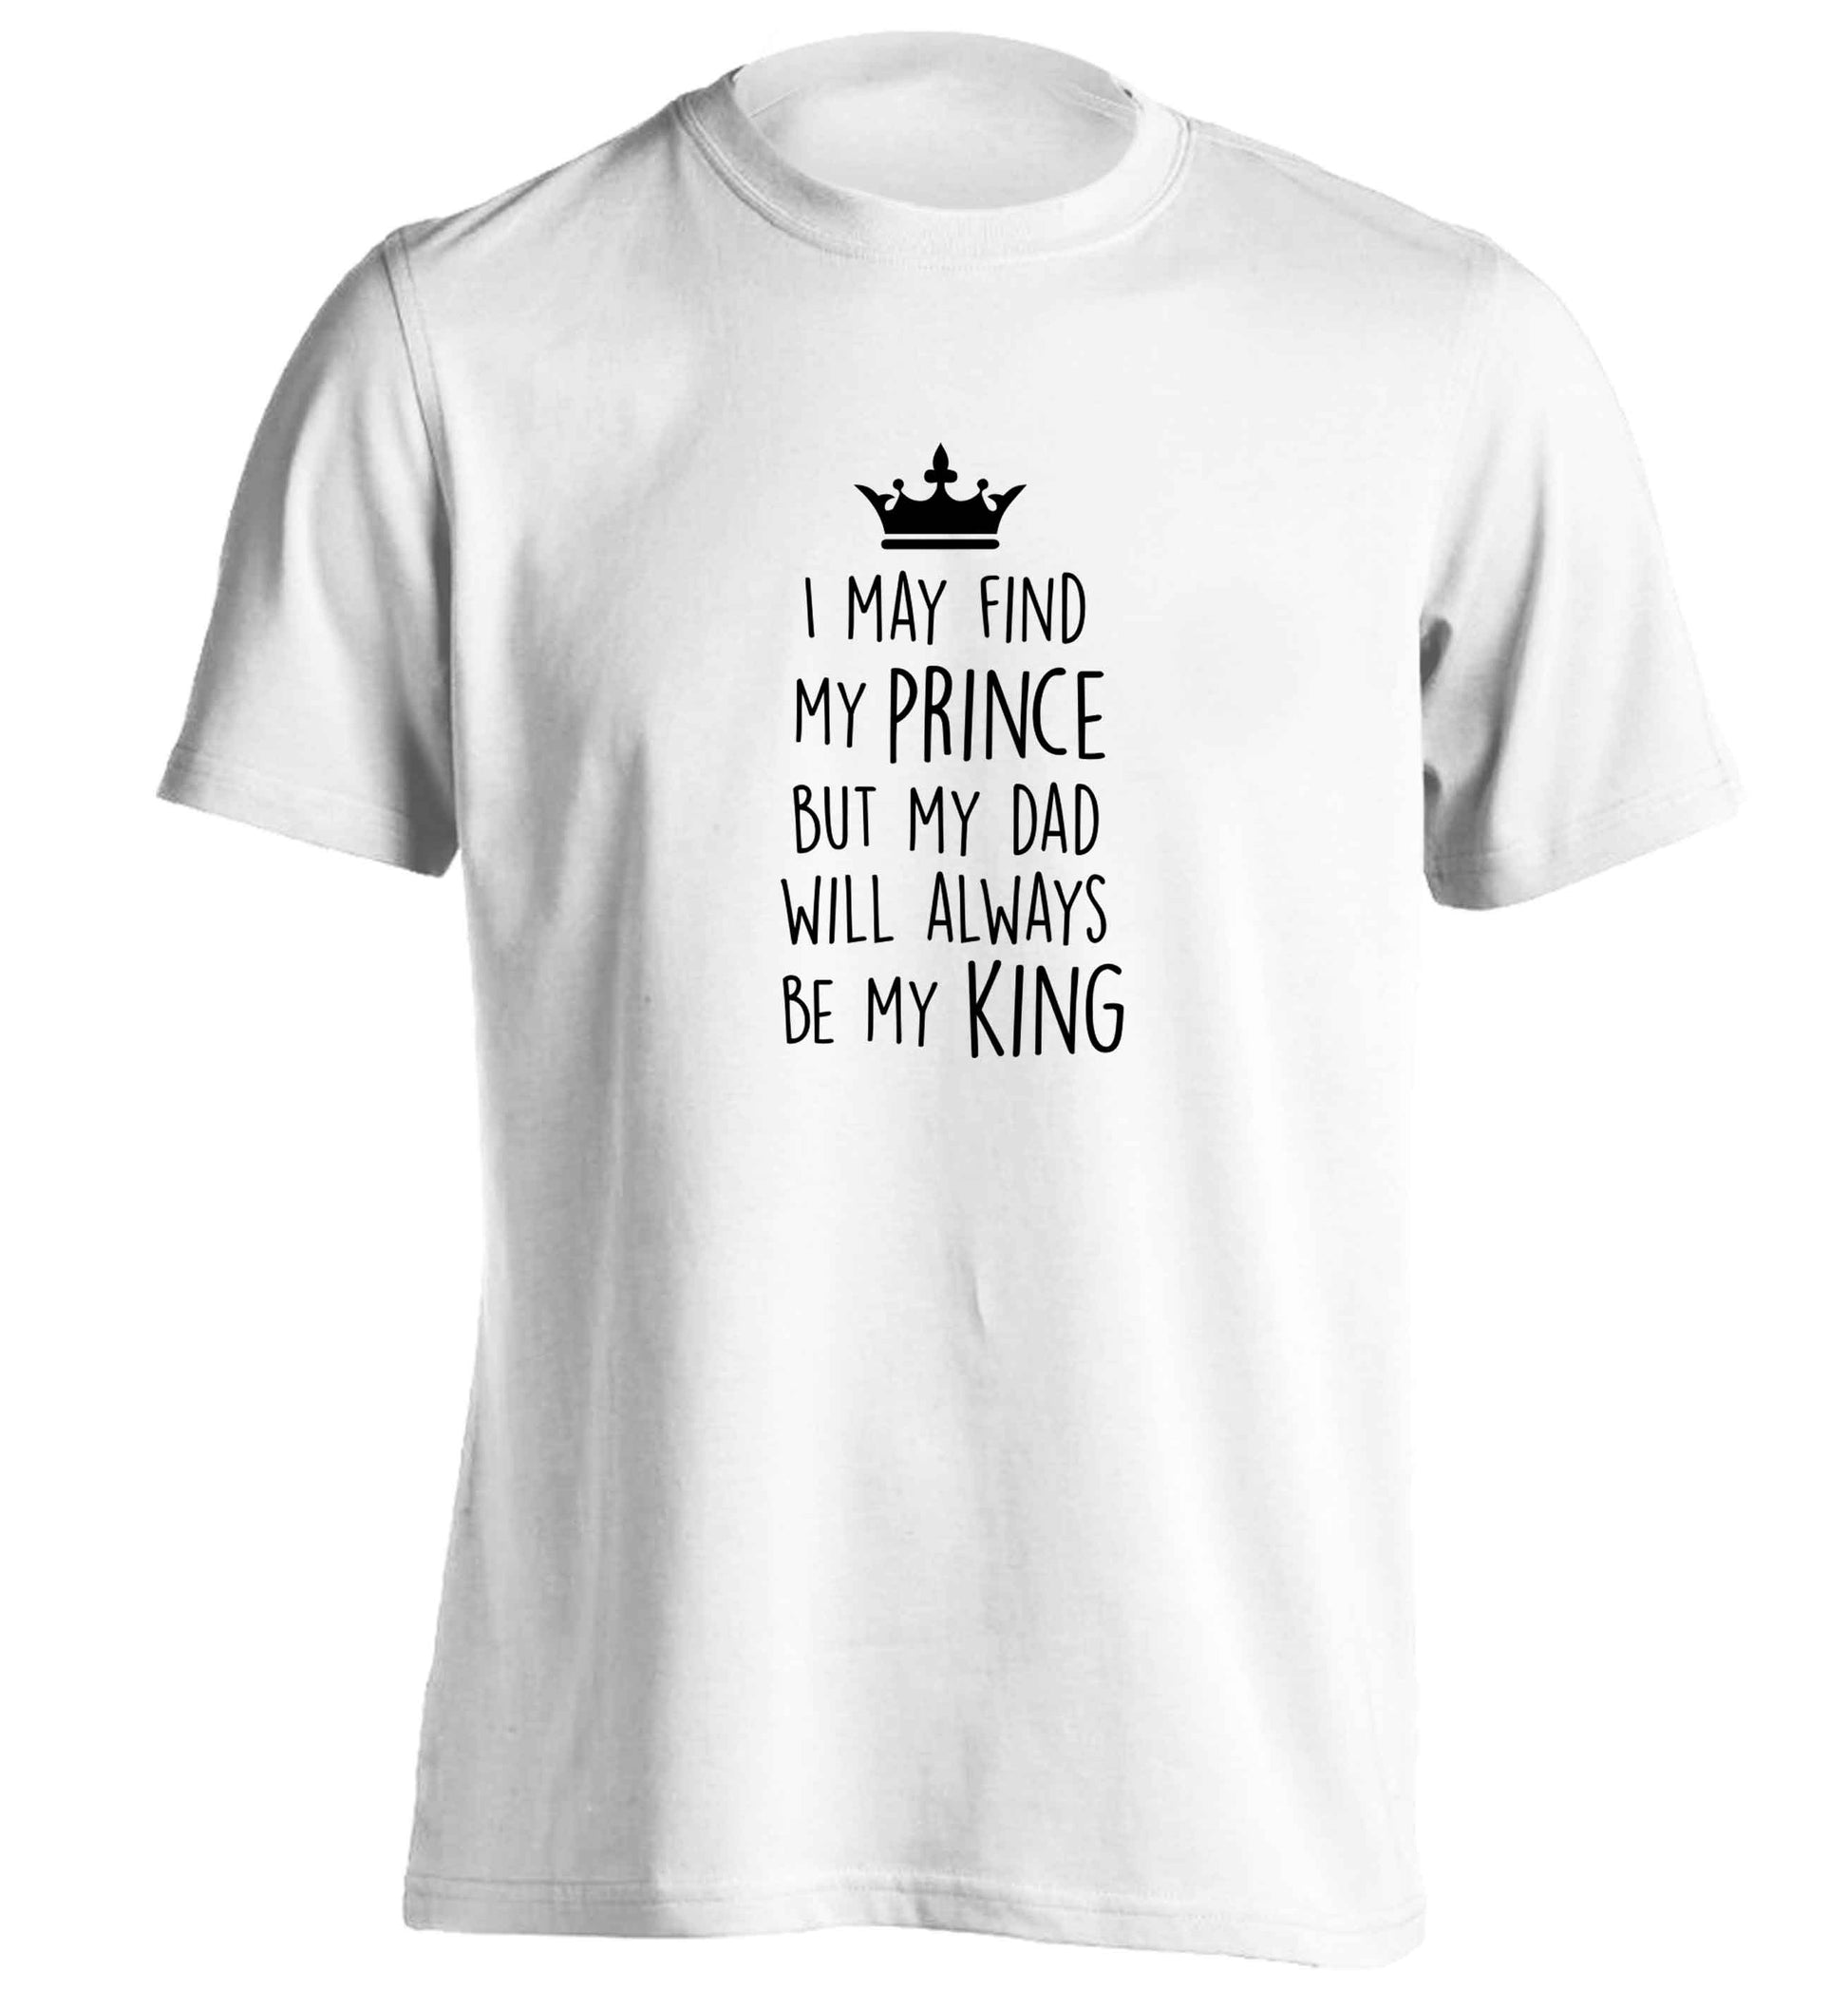 I may find my prince but my dad will always be my king adults unisex white Tshirt 2XL